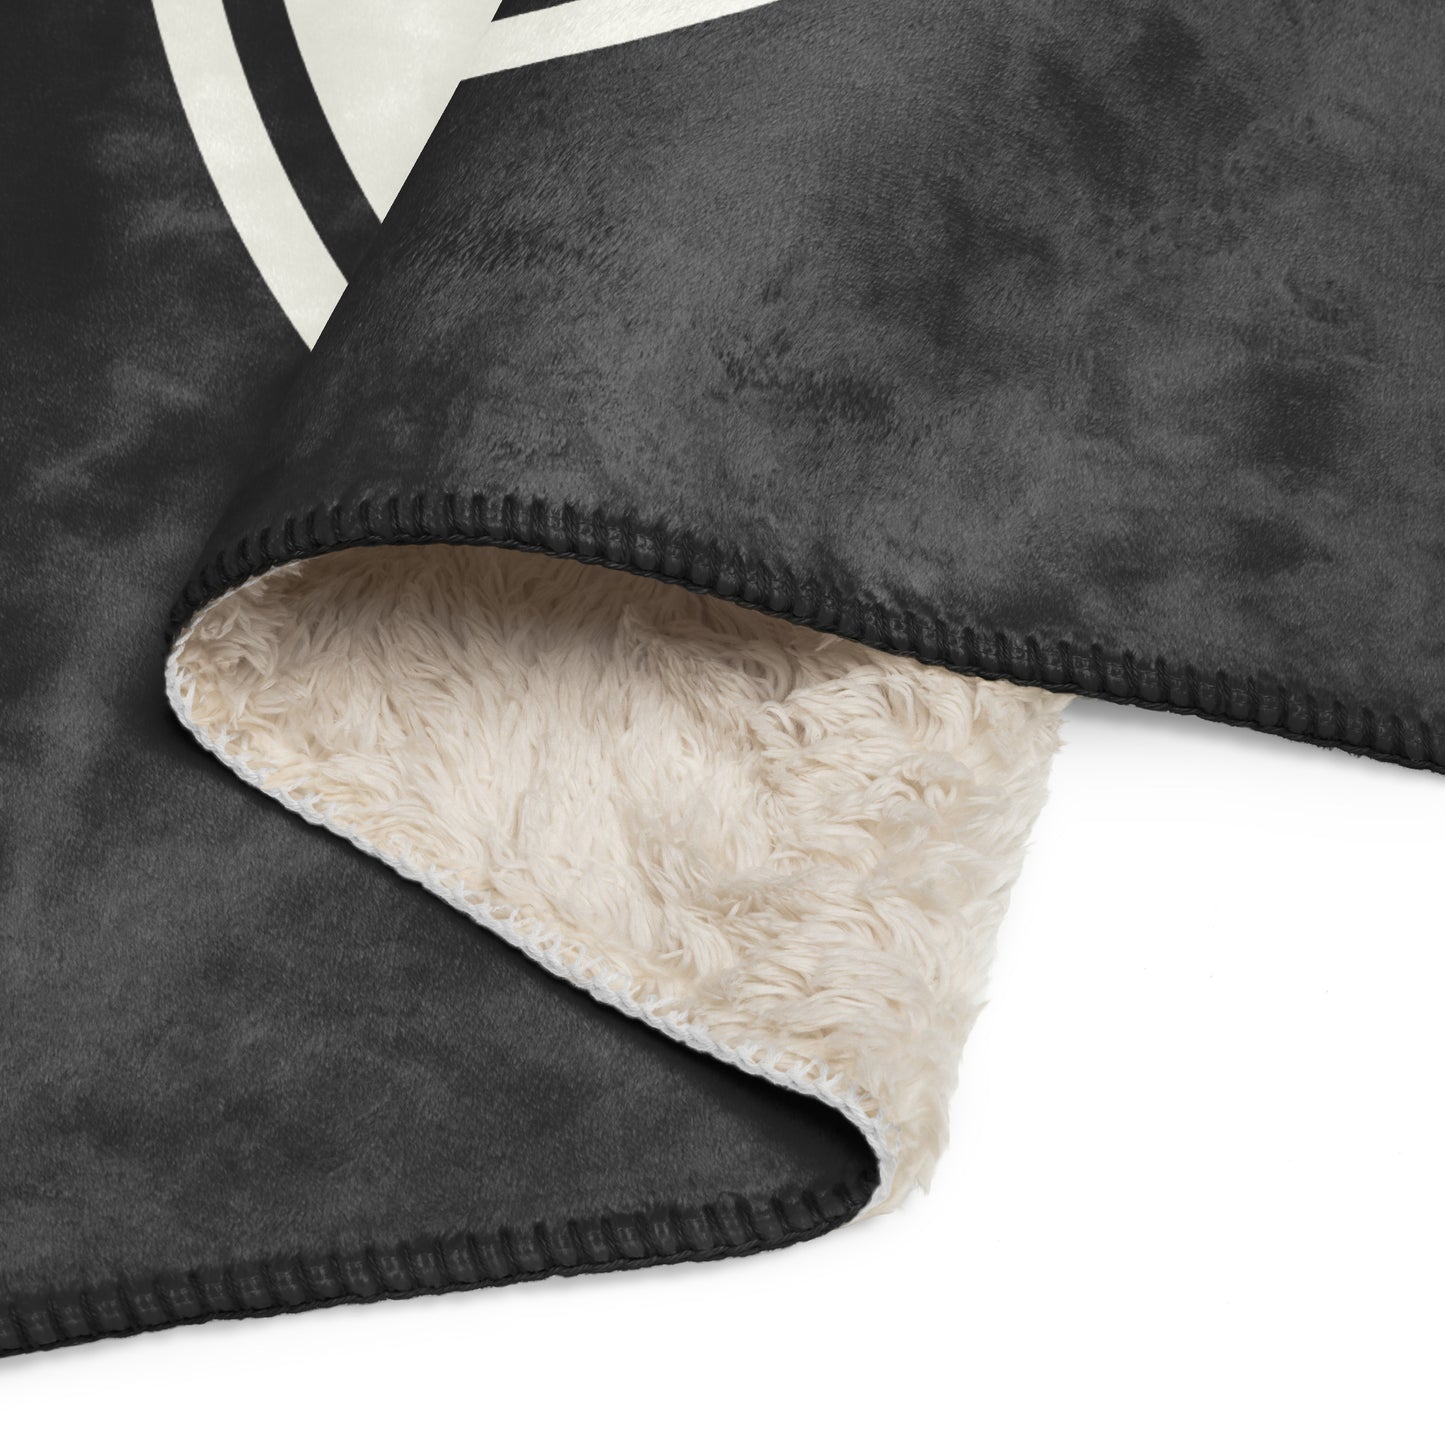 Unique Travel Gift Sherpa Blanket - White Oval • YYZ Toronto • YHM Designs - Image 08